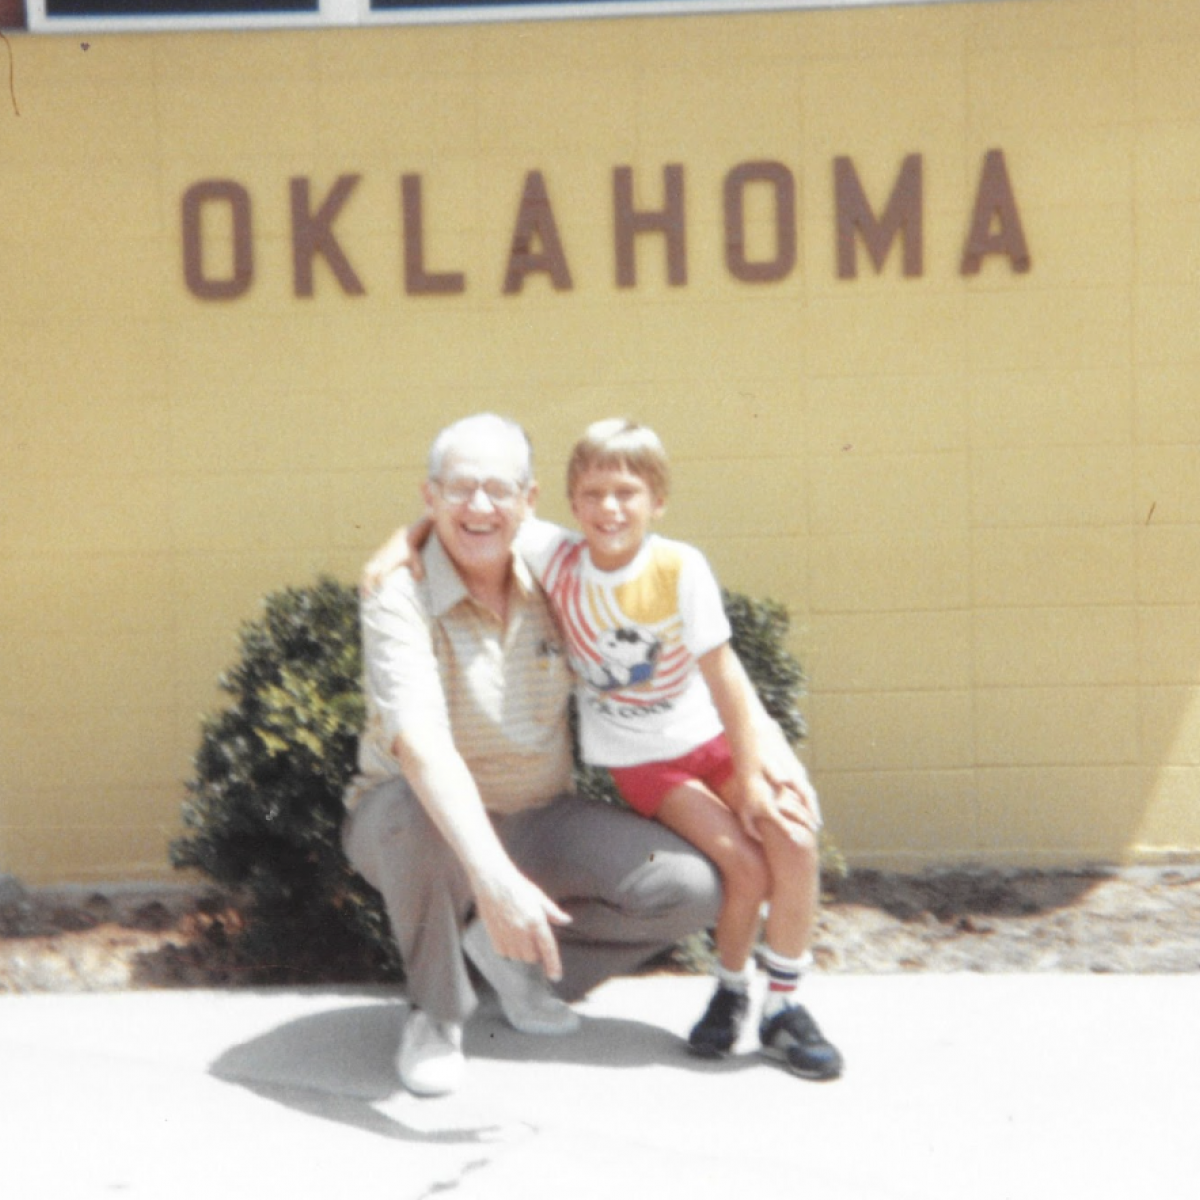 Grandaddy and Ryan in the early 1980s